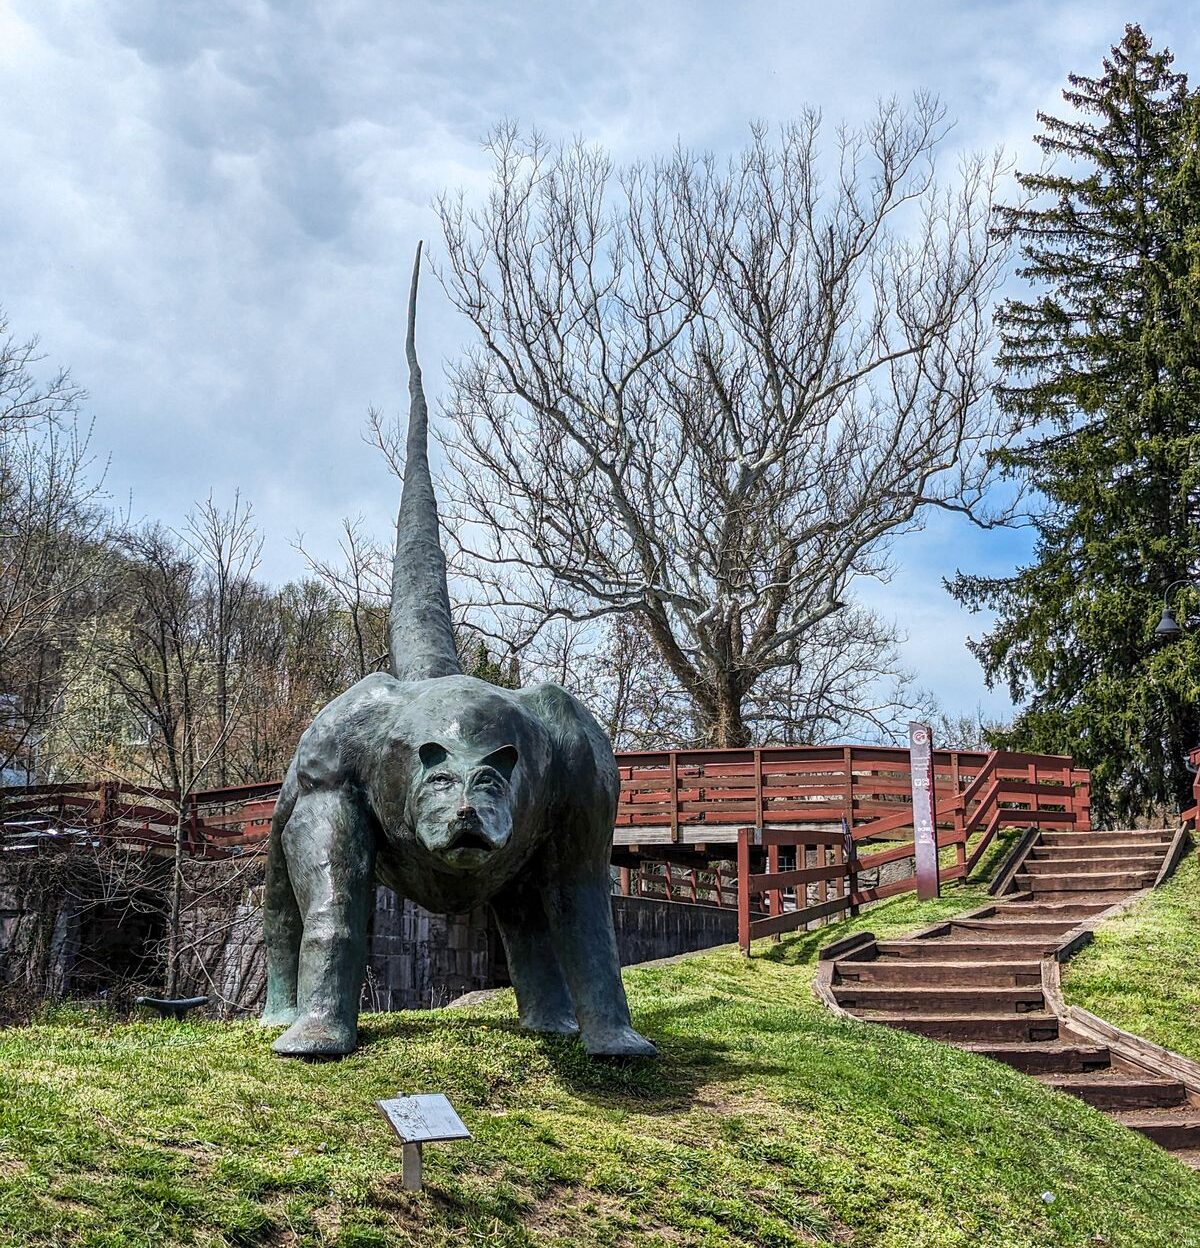 "Boomer" a large dog/dinosaur sculpture greets visitors on their way to New Hope